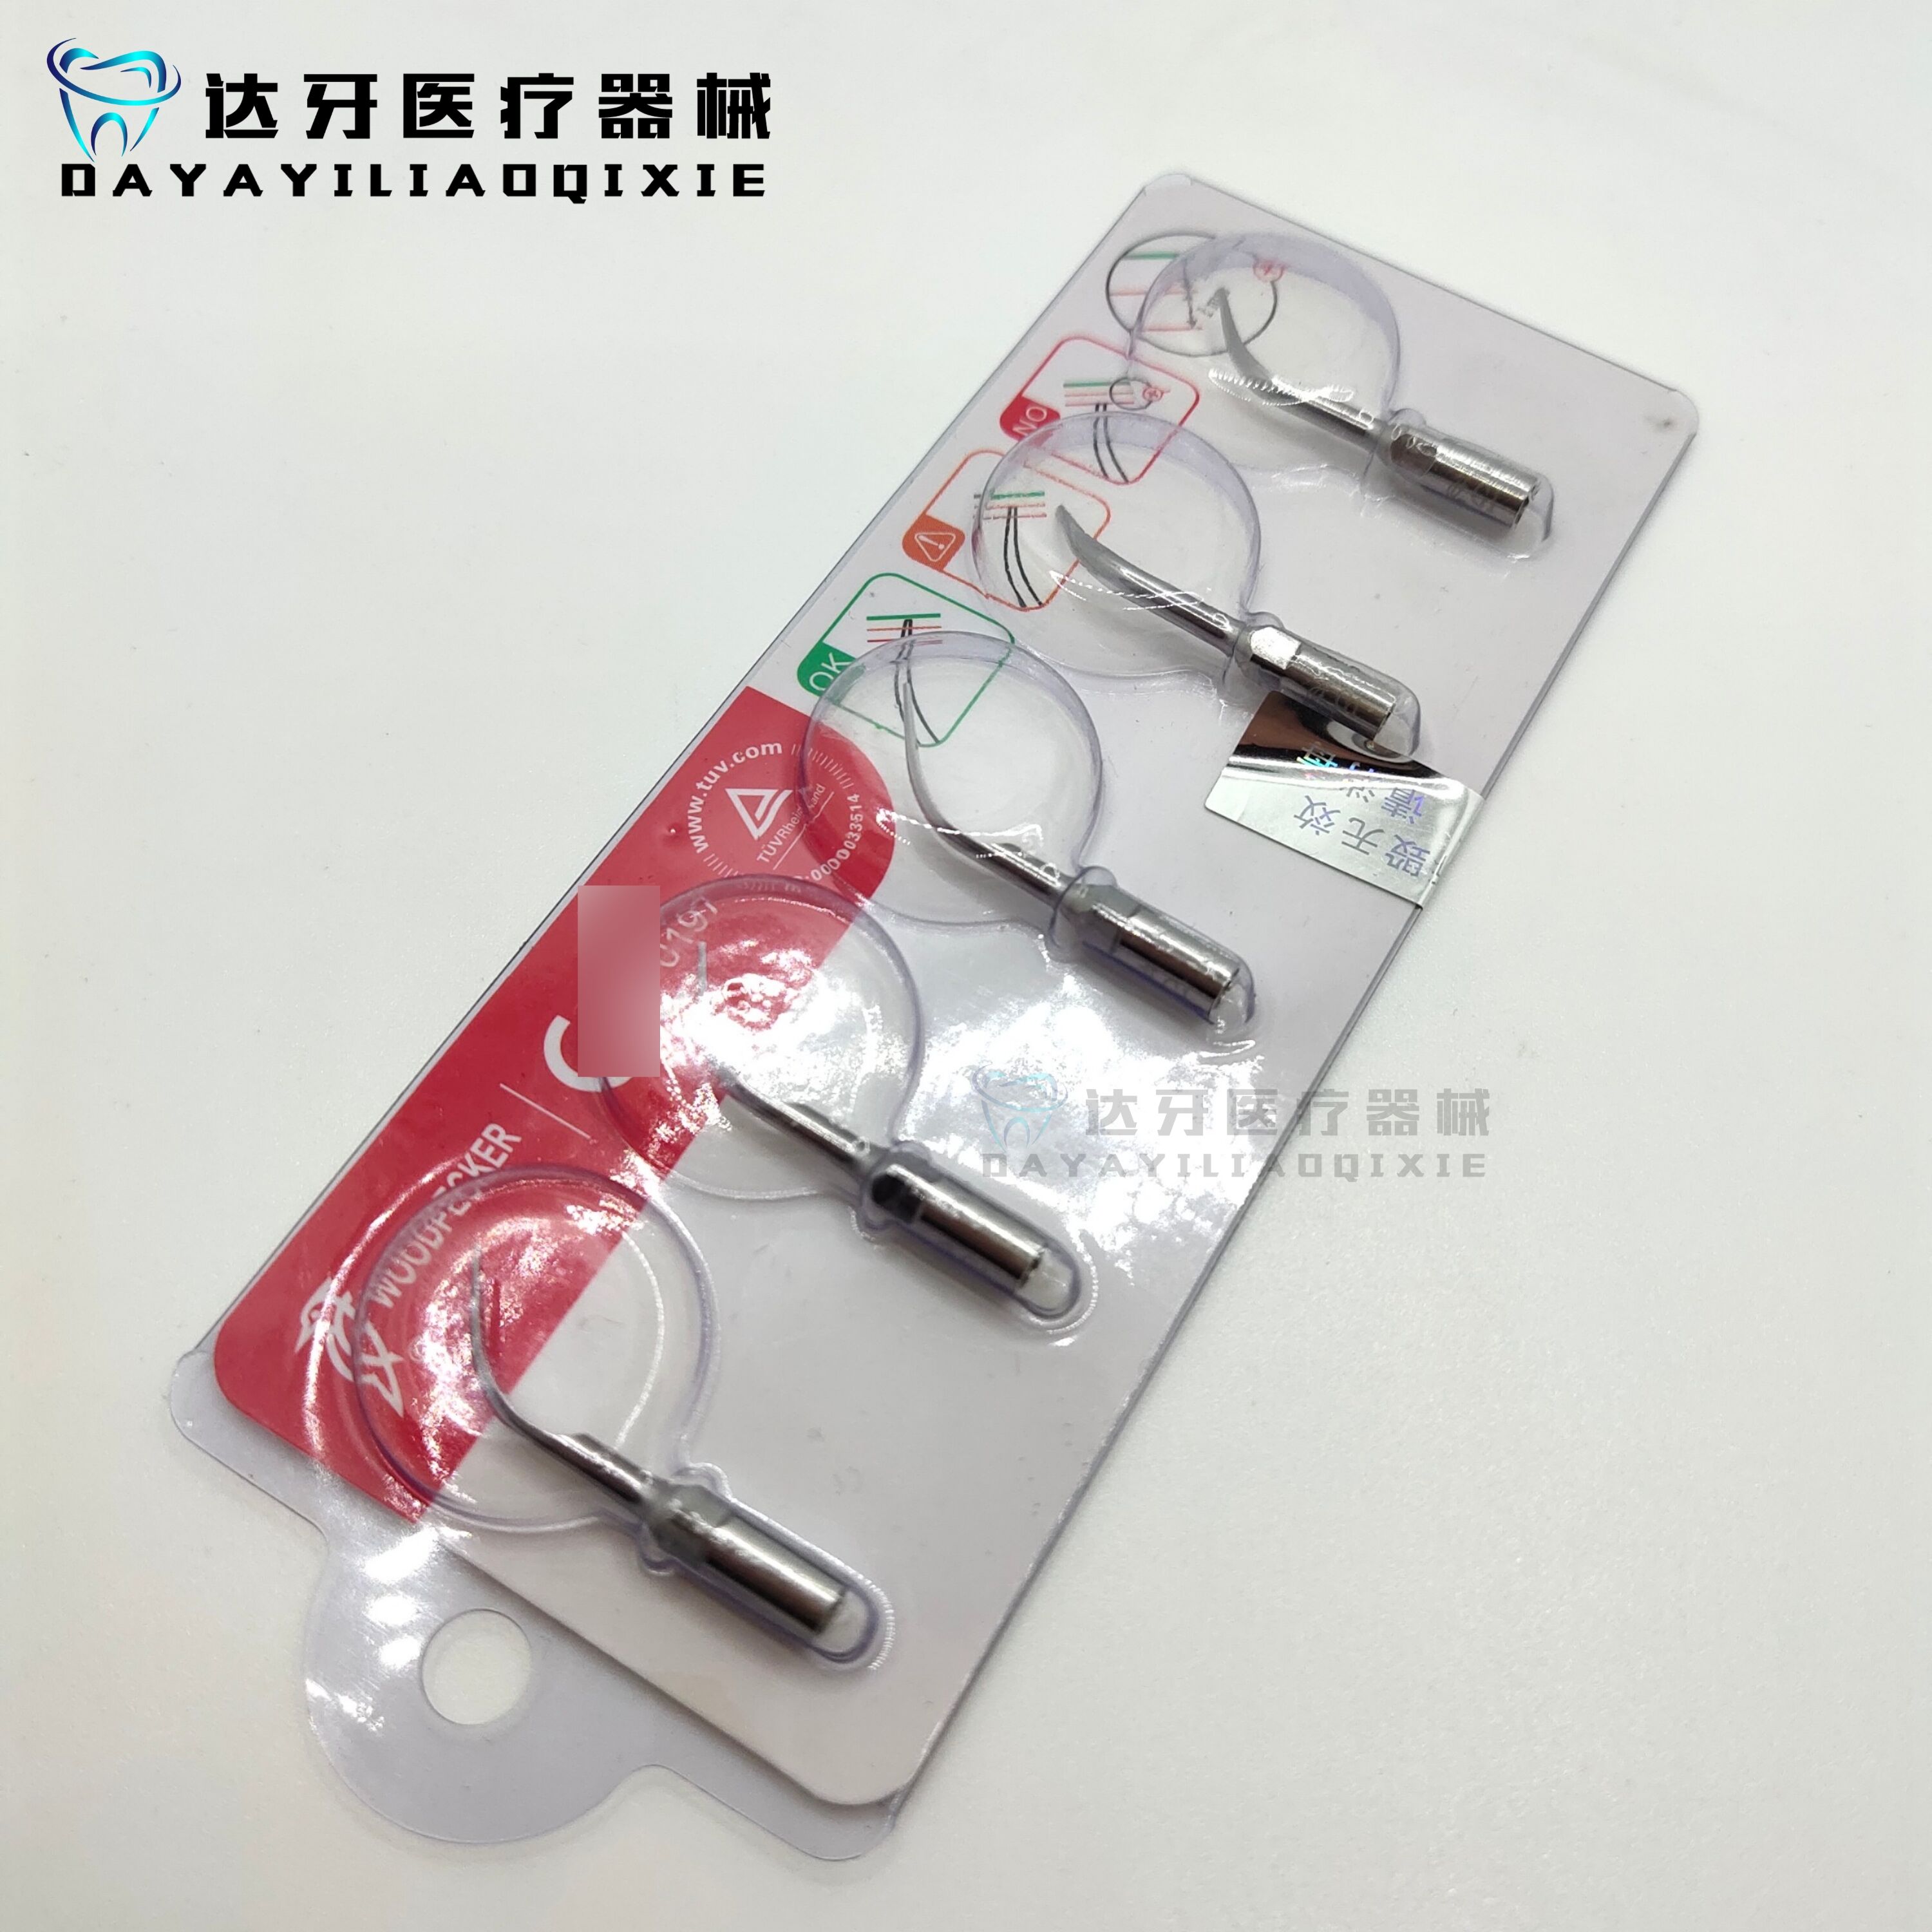 Woodpecker BladeStomatology Department Material Science disposable Dental cleaning machine Cutter head Sharp point Flat head Dental cleaning machine Working tip Wash teeth Cutter head dentistry